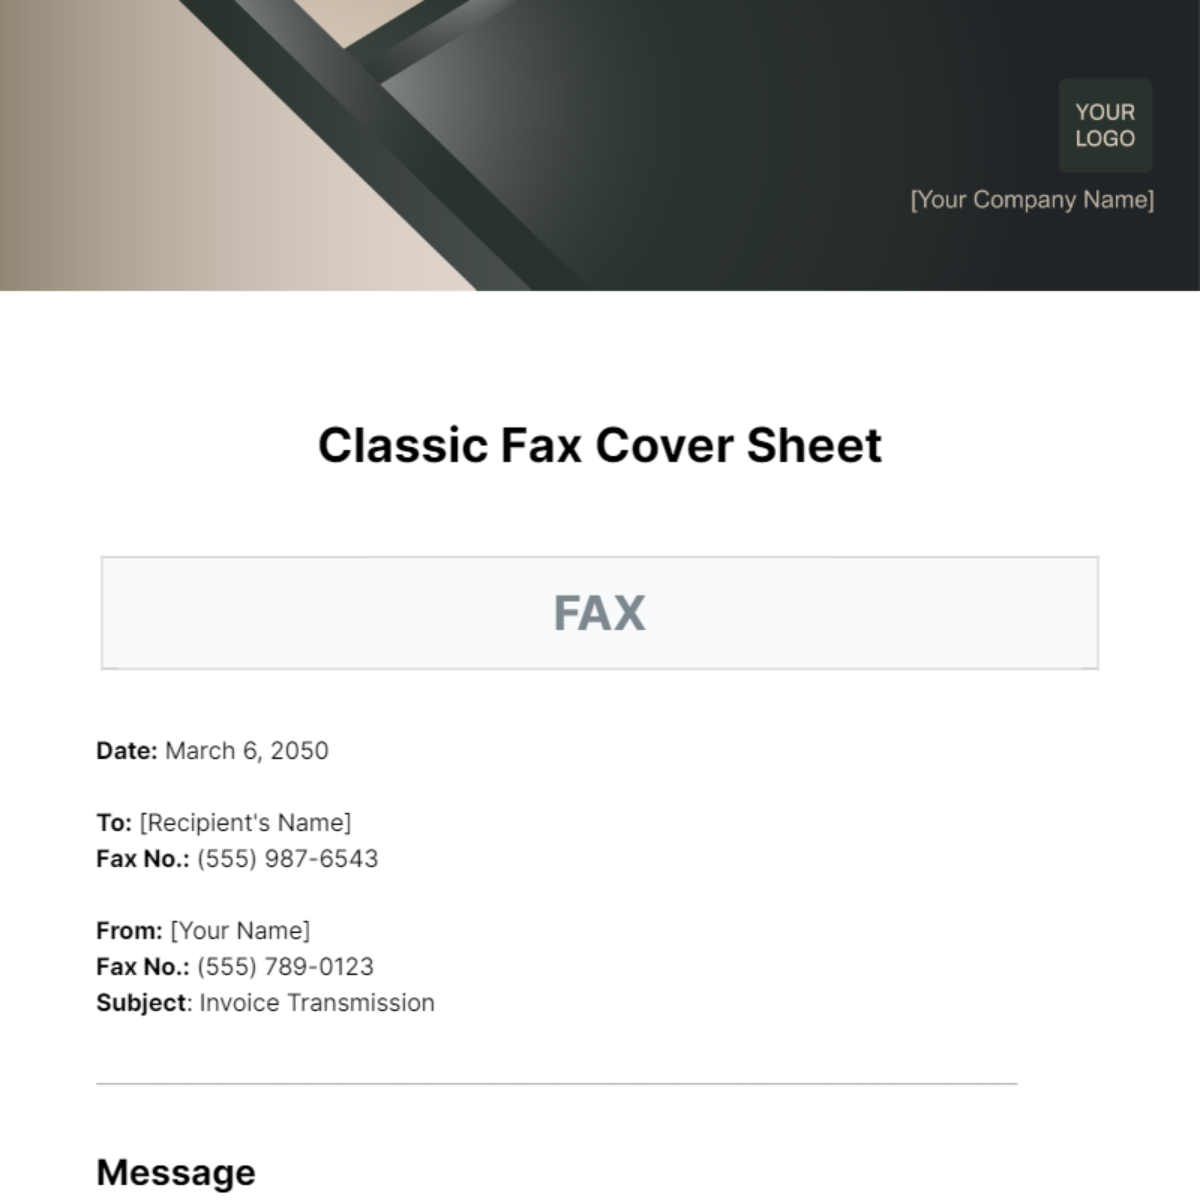 Classic Fax Cover Sheet